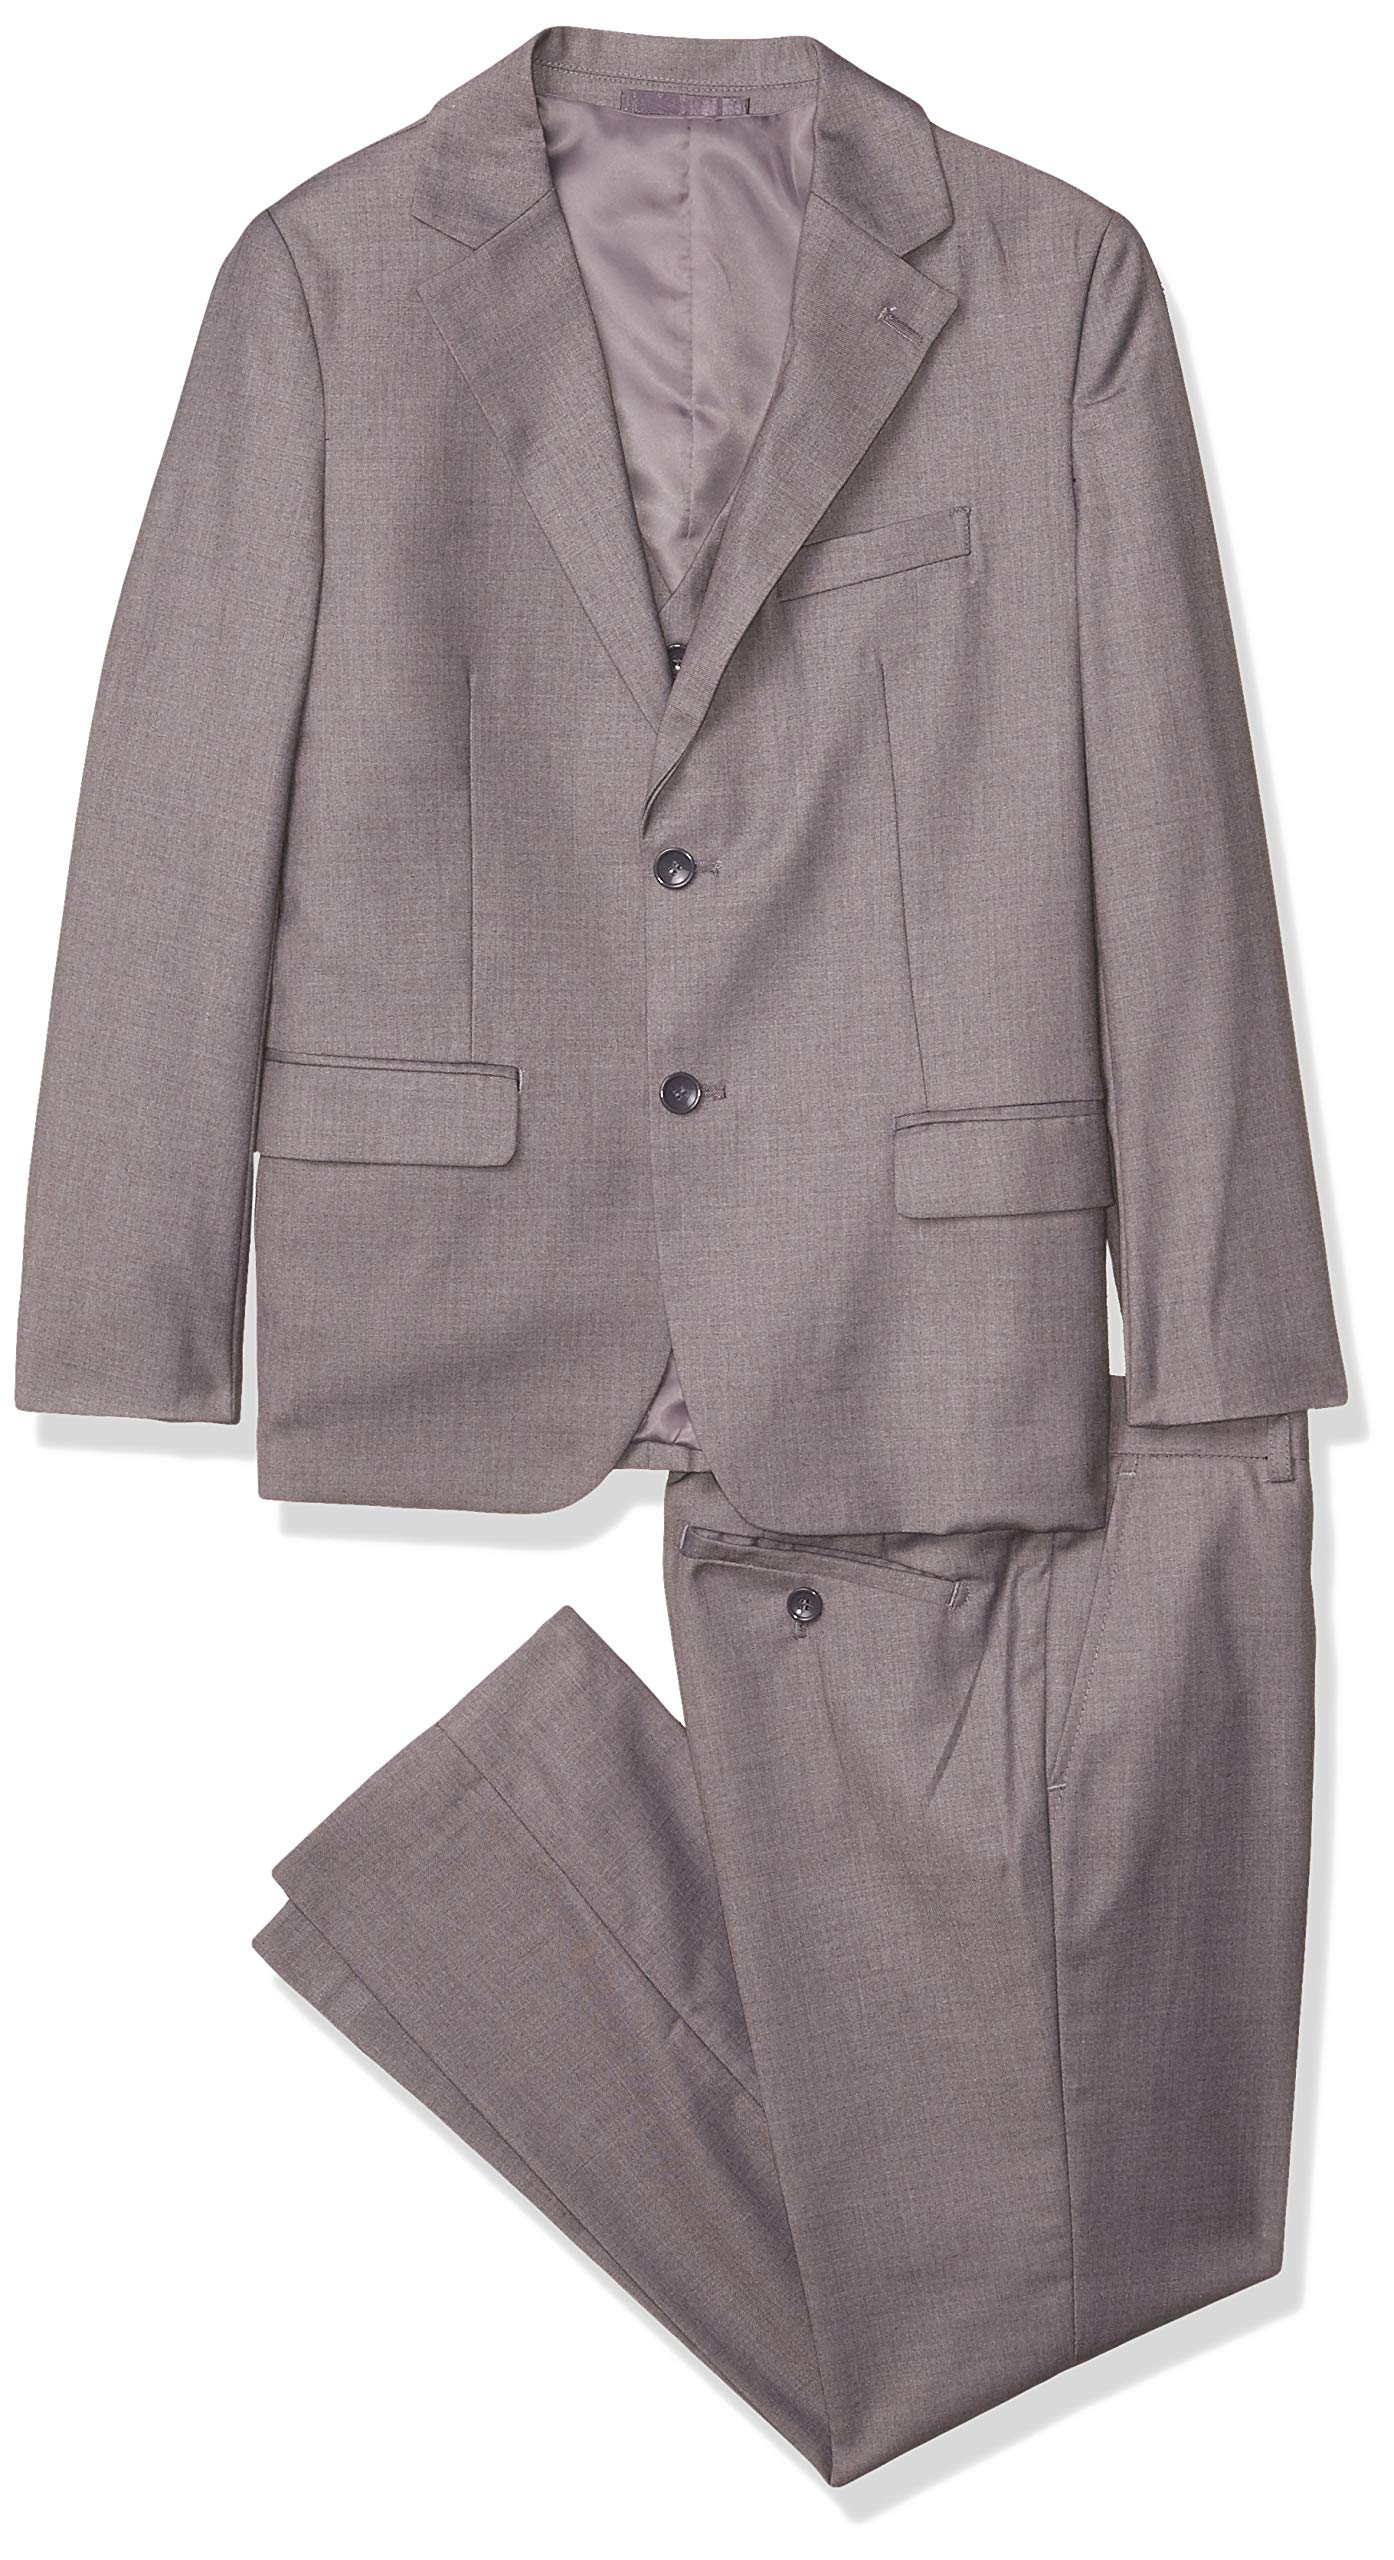 American Exchange Boys Solid Vested Suit-Husky Sizes